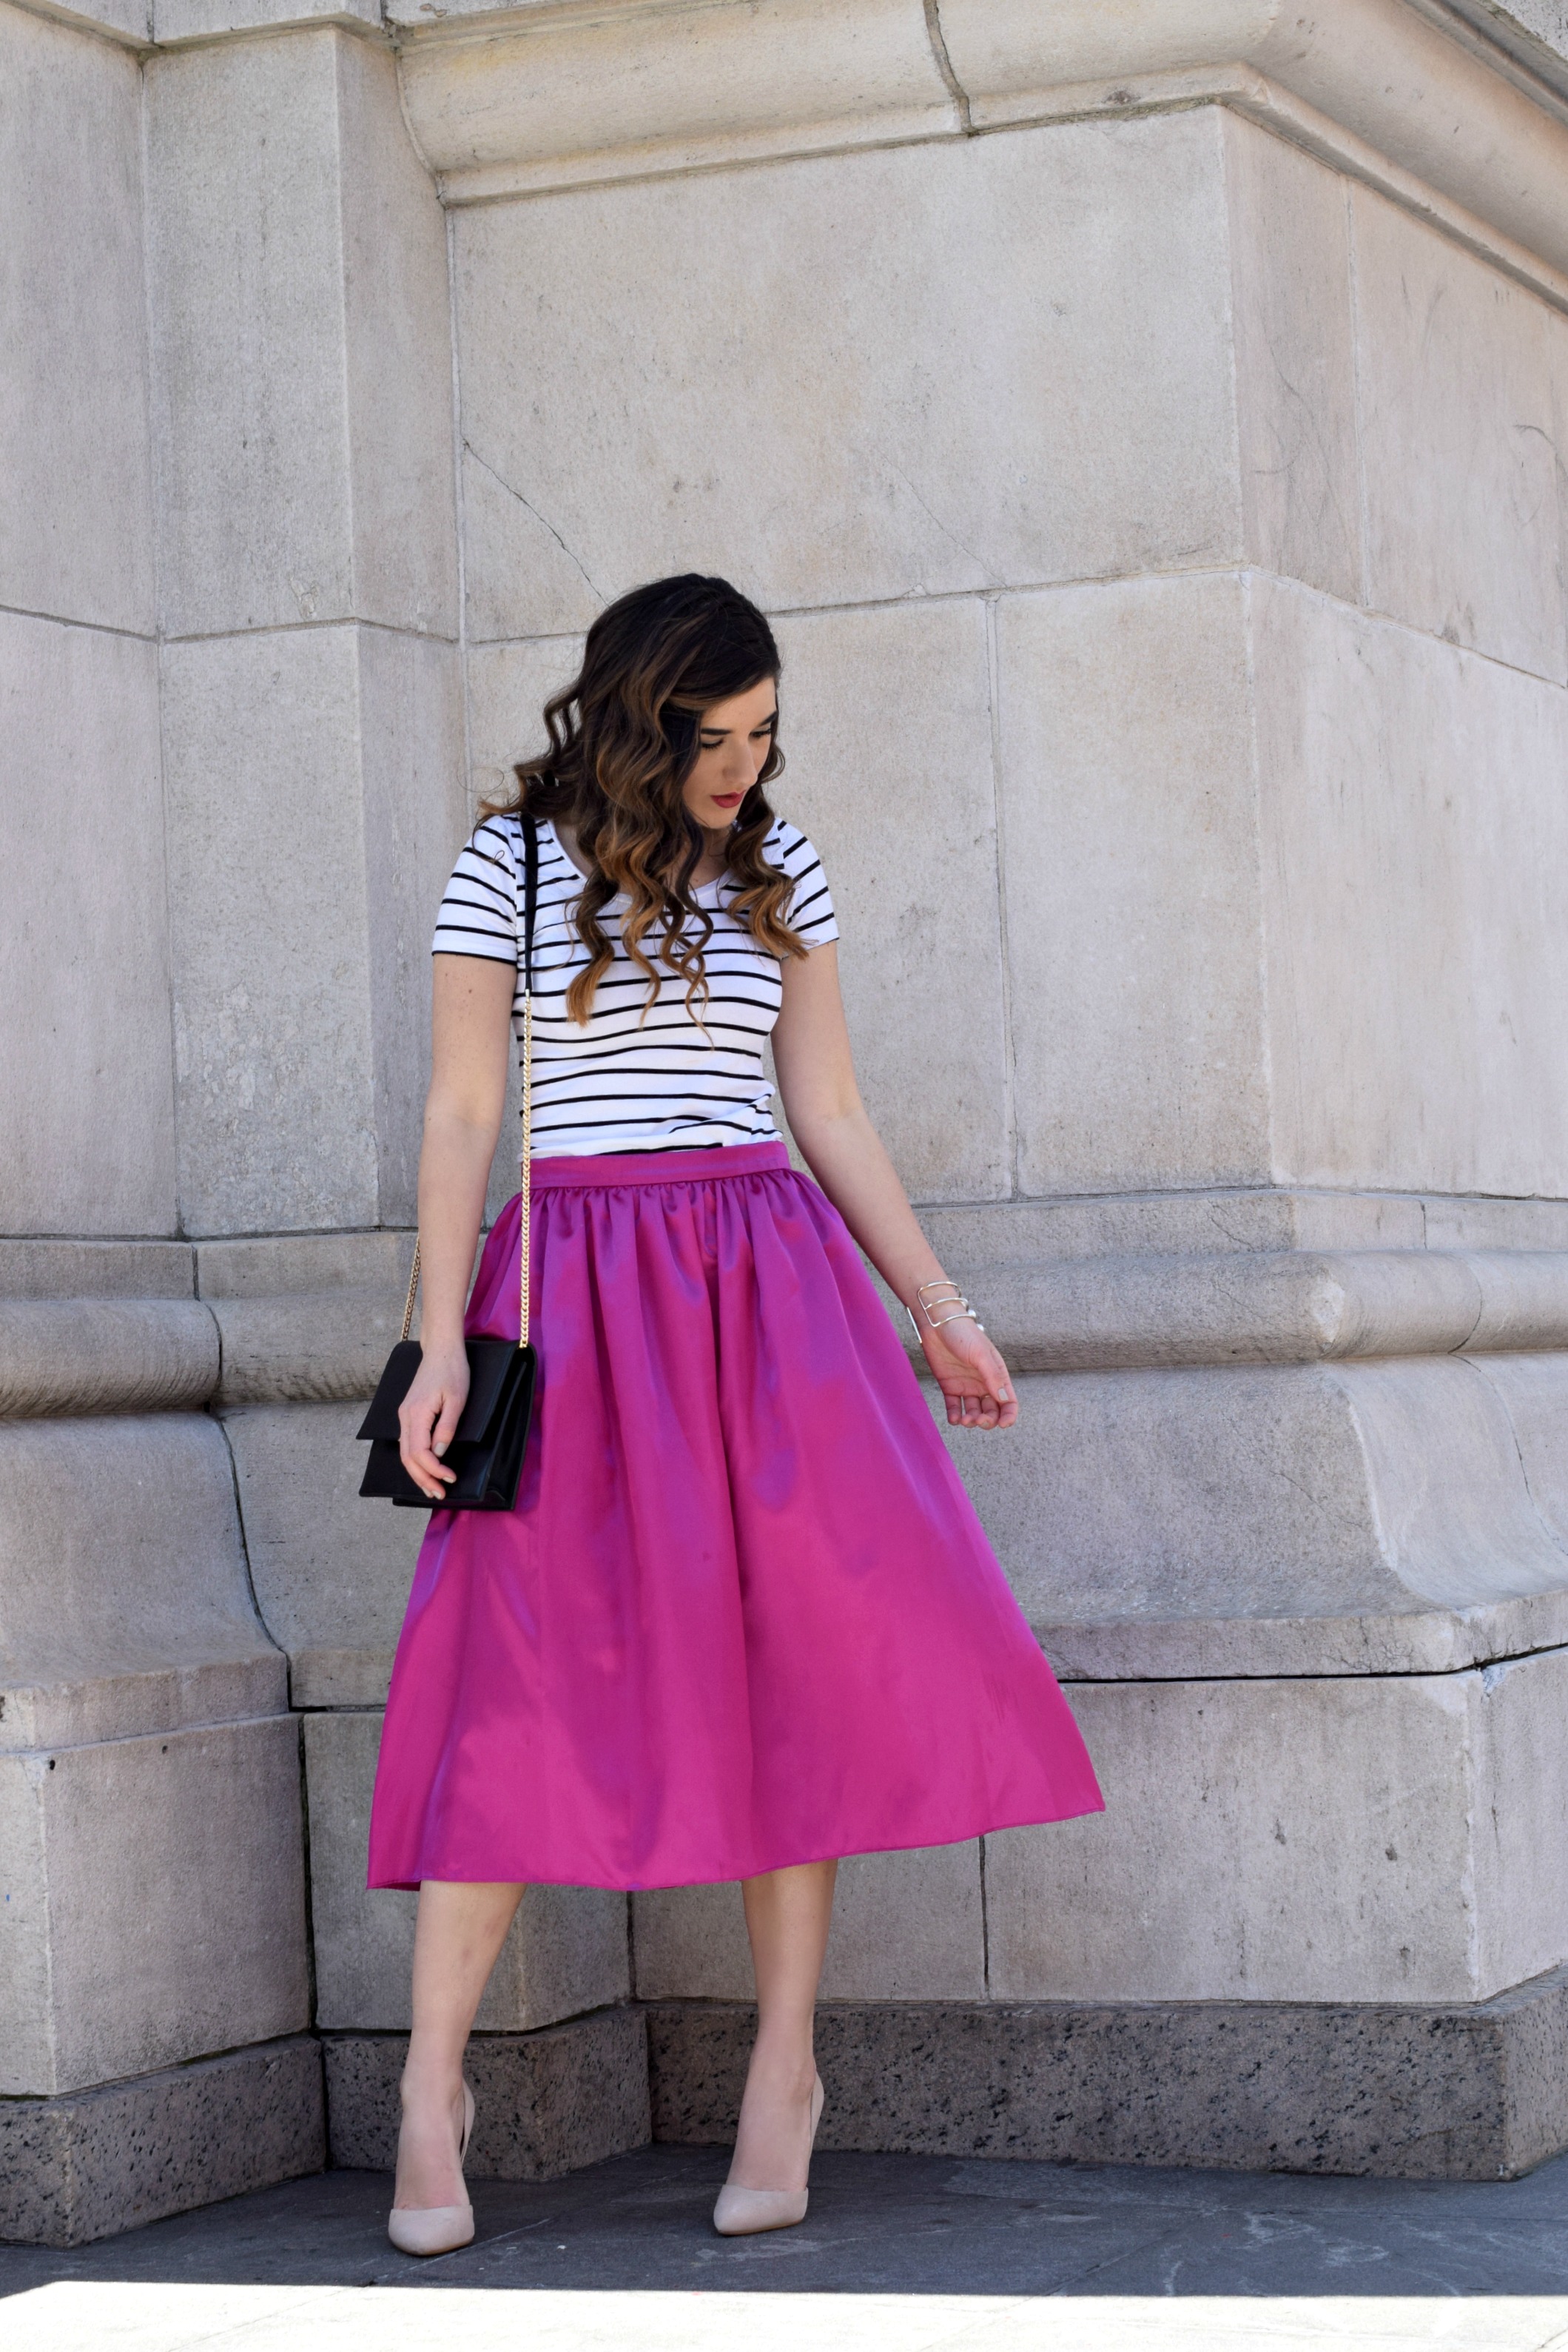 Fuchsia Party Skirt More Than Just Figleaves Louboutins & Love Fashion Blog Esther Santer NYC Street Style Blogger Outfit OOTD Midi Photoshoot Women Girl Striped Tee Ivanka Trump Black Purse Choker Bracelet Gold Jewelry Nude Heels Shoes Steve Madden.jpg